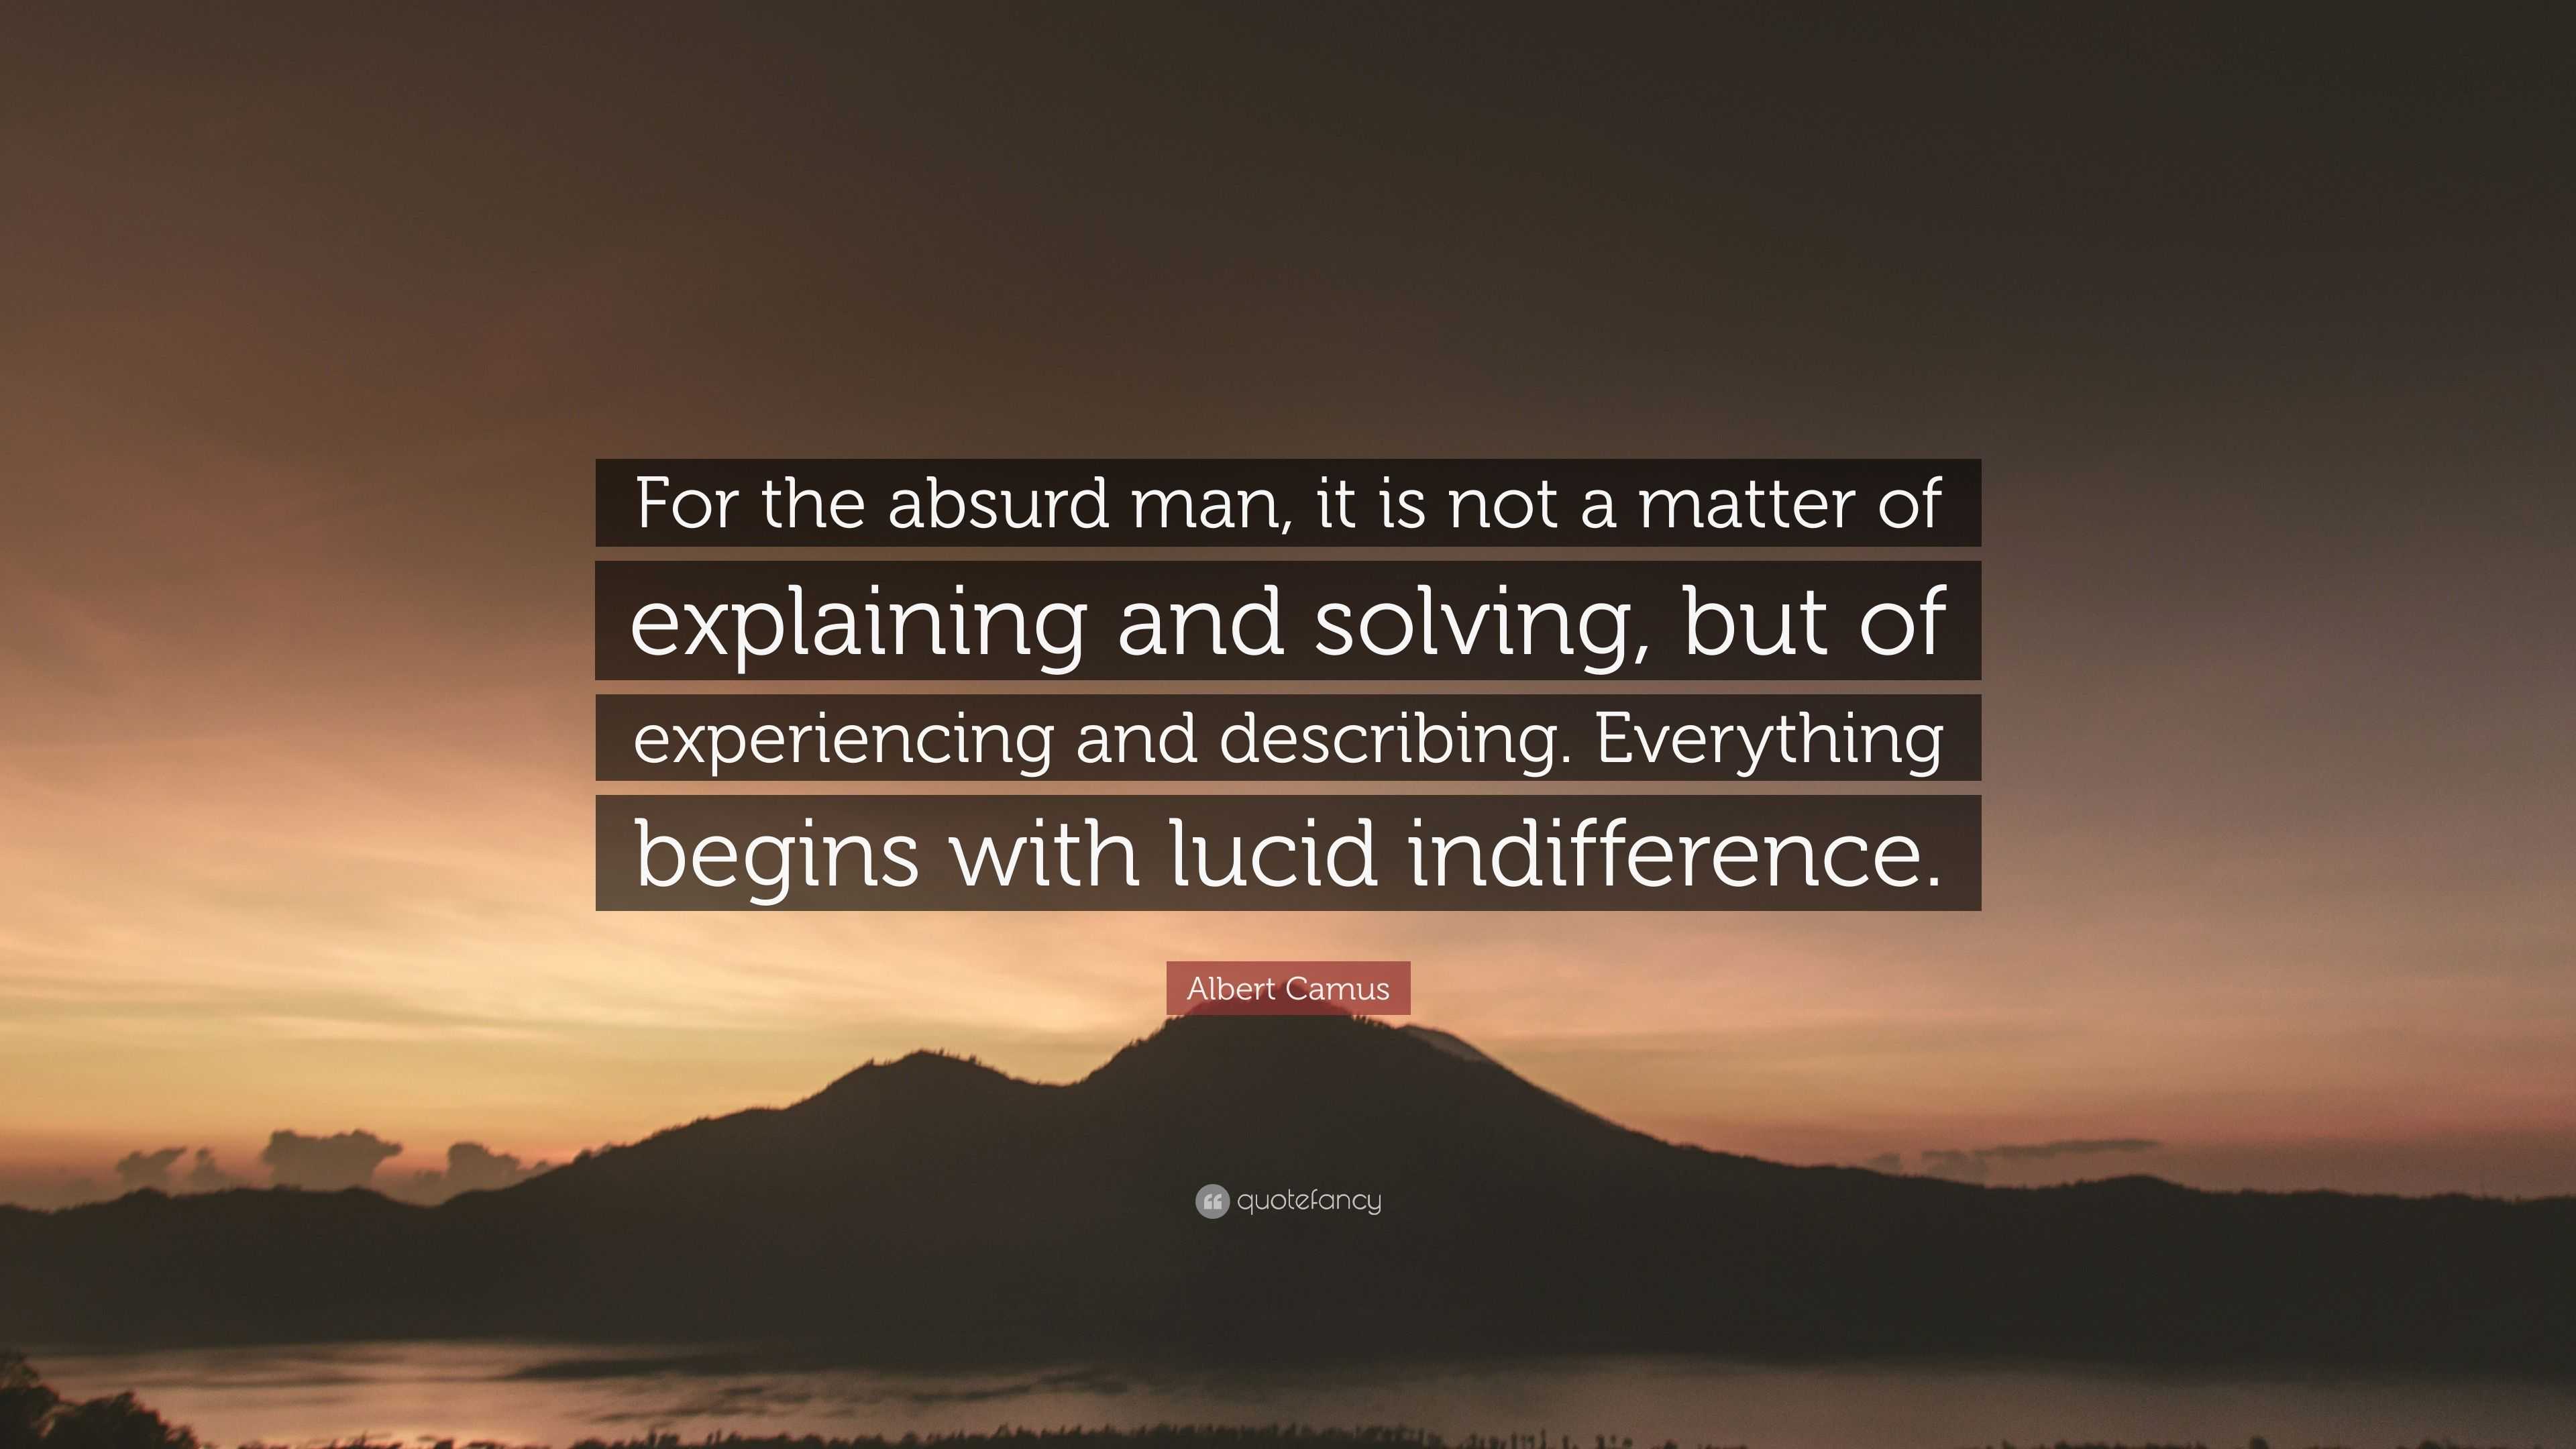 Albert Camus Quote For The Absurd Man It Is Not A Matter Of Explaining And Solving But Of